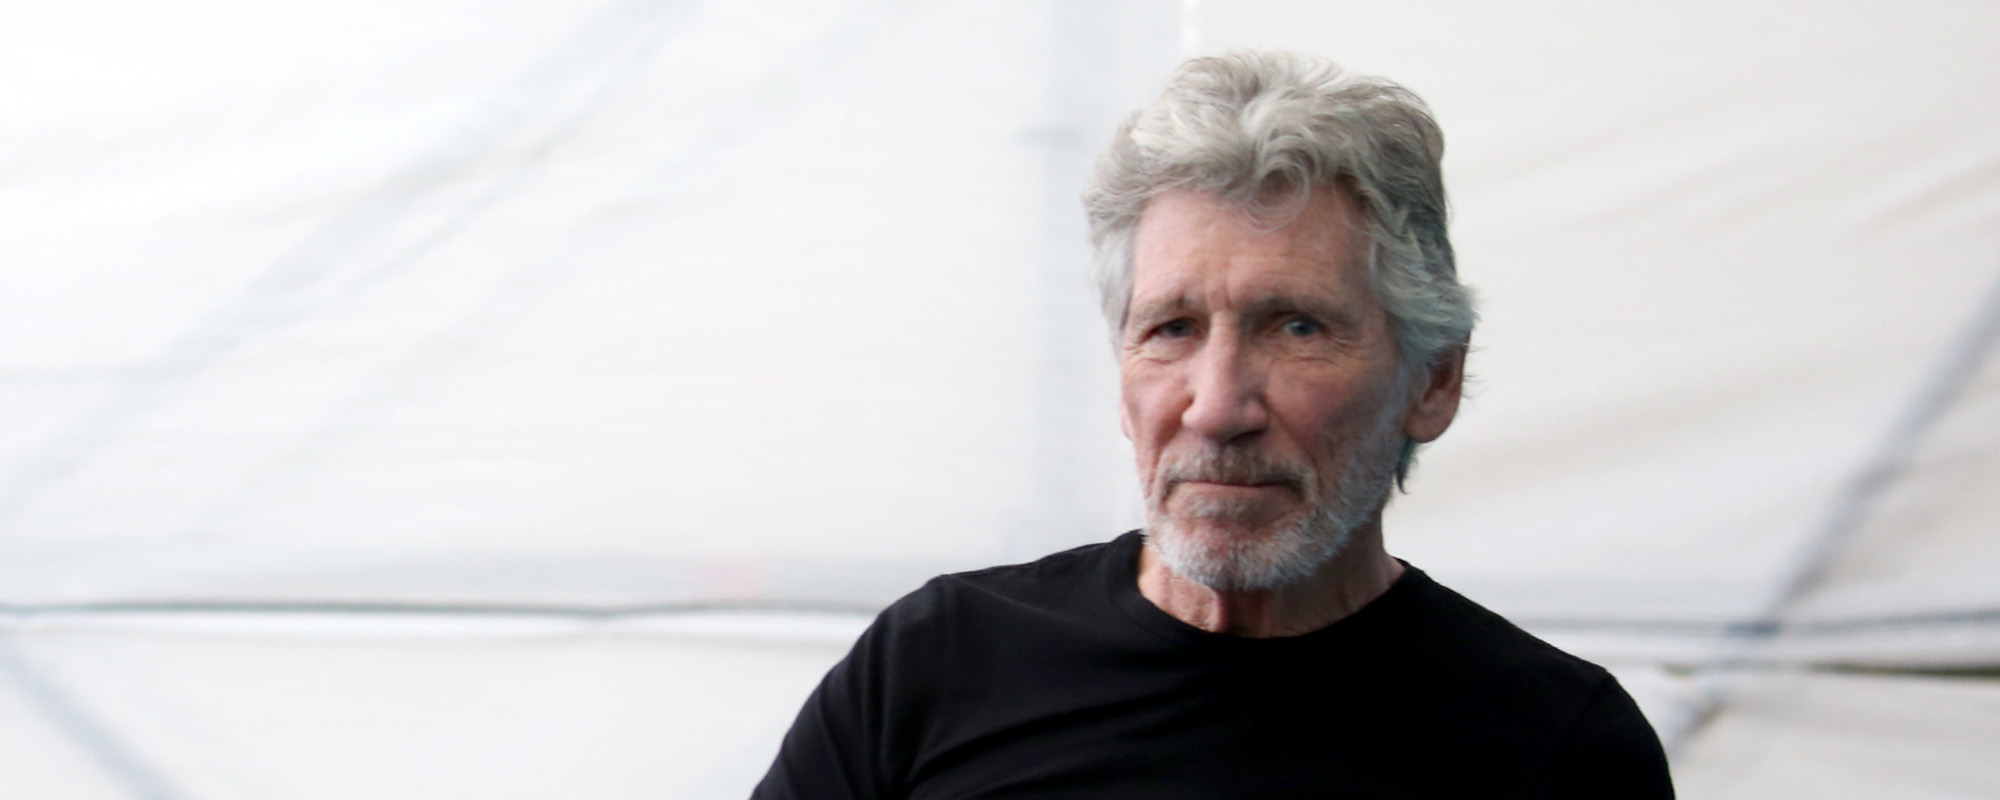 Roger Waters Asks Russian President Vladimir Putin to Not “Overrun the Whole of Europe”